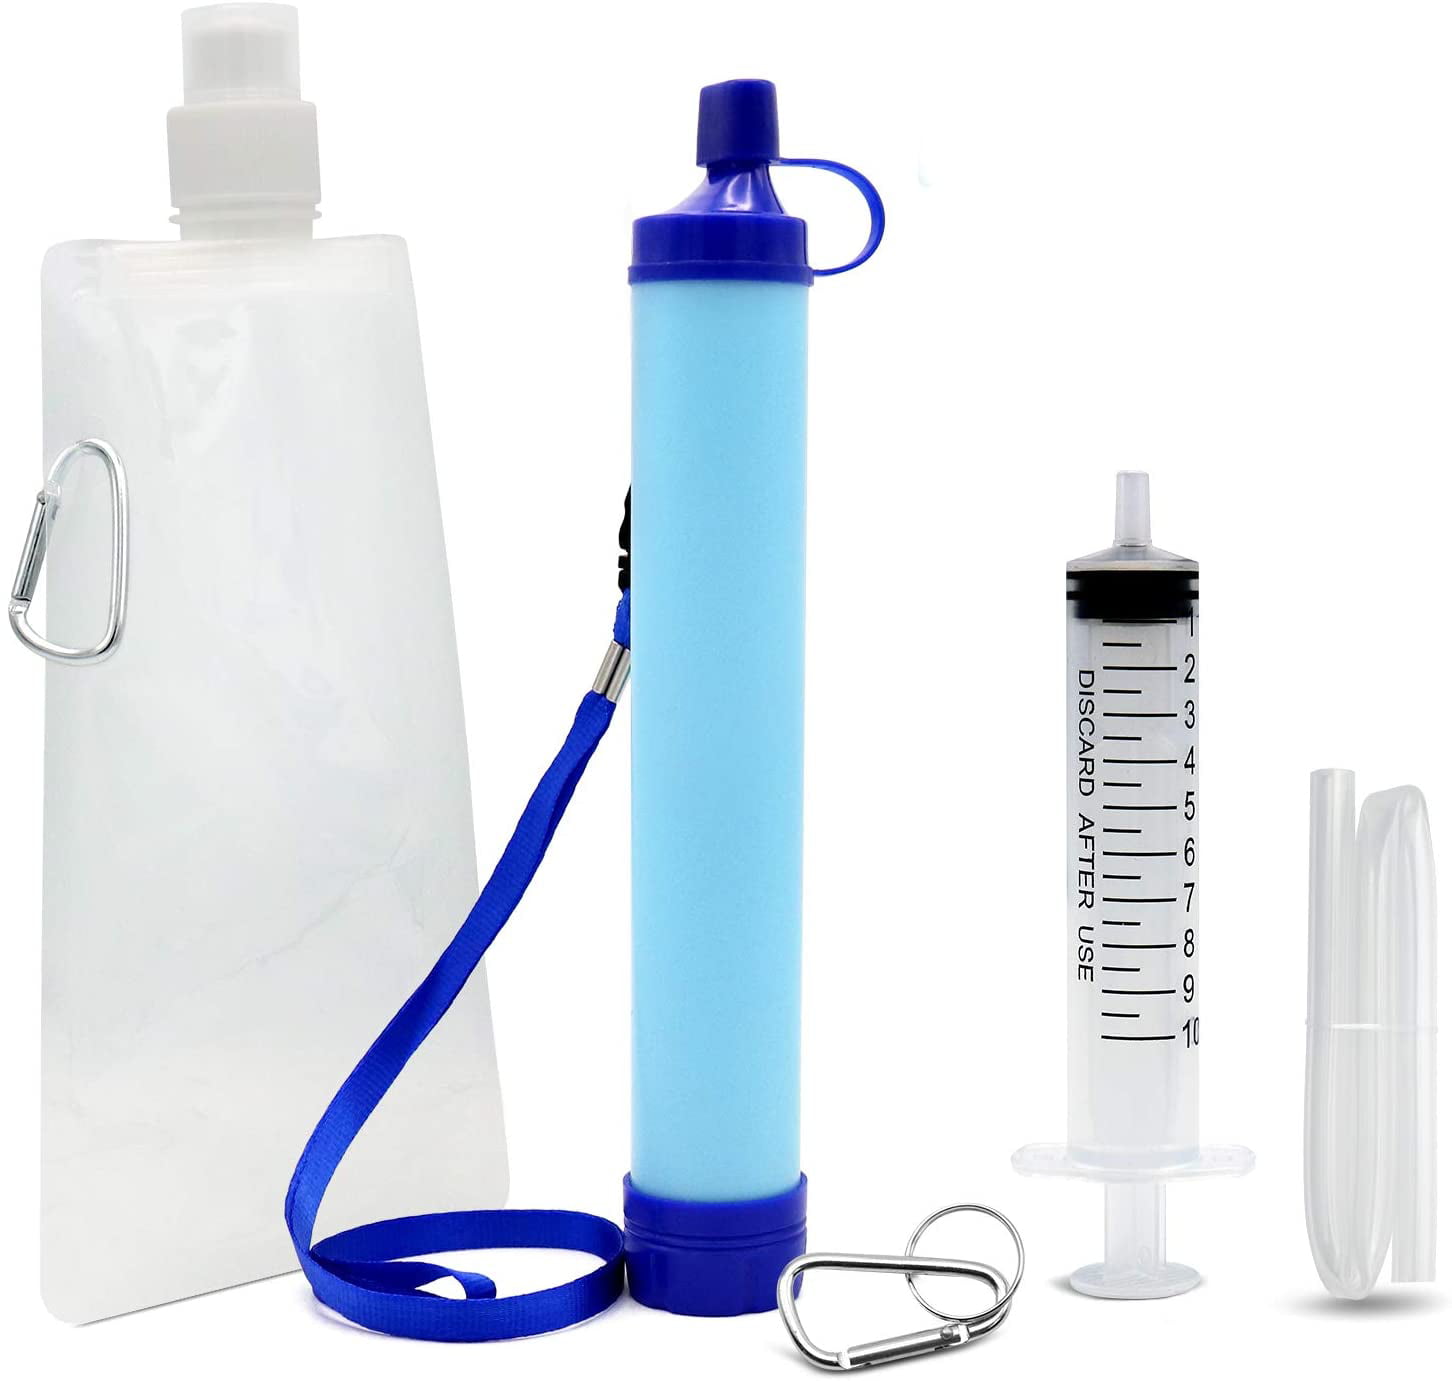 Mini Personal Water Filtration Straw System,Outdoor Survival kit Emergency Gear Water Filter for Camping Hiking Sports Traveling Climbing Backpacking 